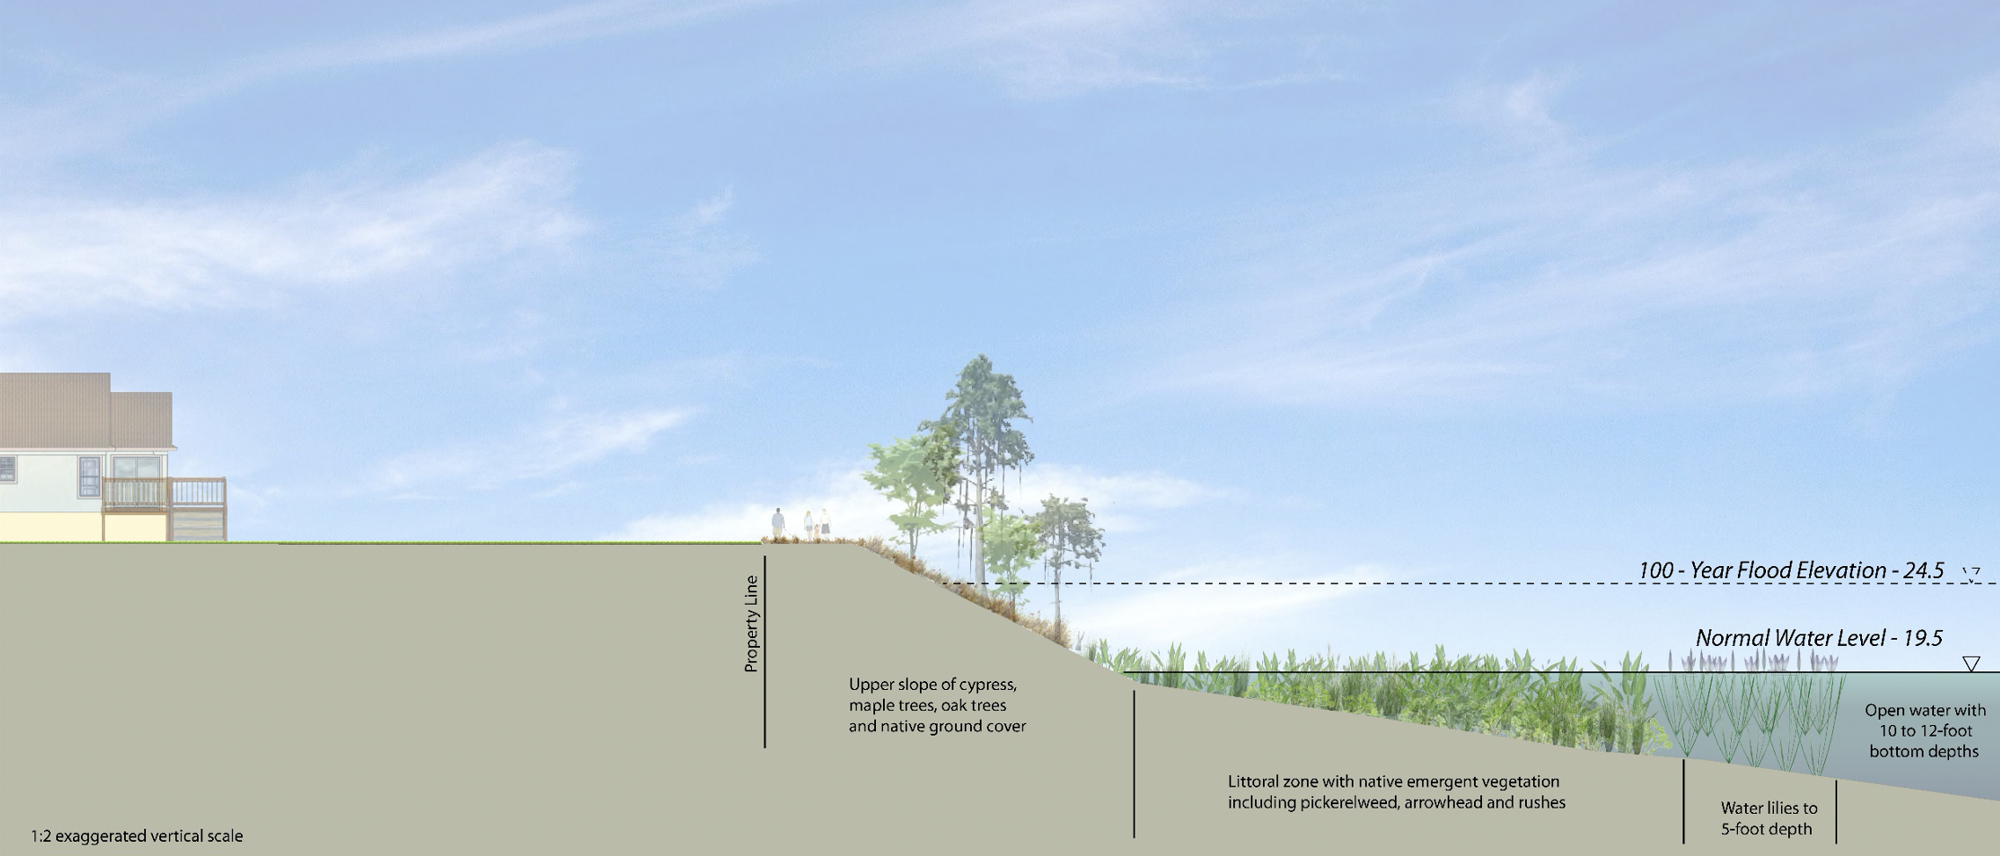 A cross section of the proposed lake. The vertical scale is exaggerated in the image, so the slope appears steeper than it actually would be. Image courtesy of the city of Palm Coast